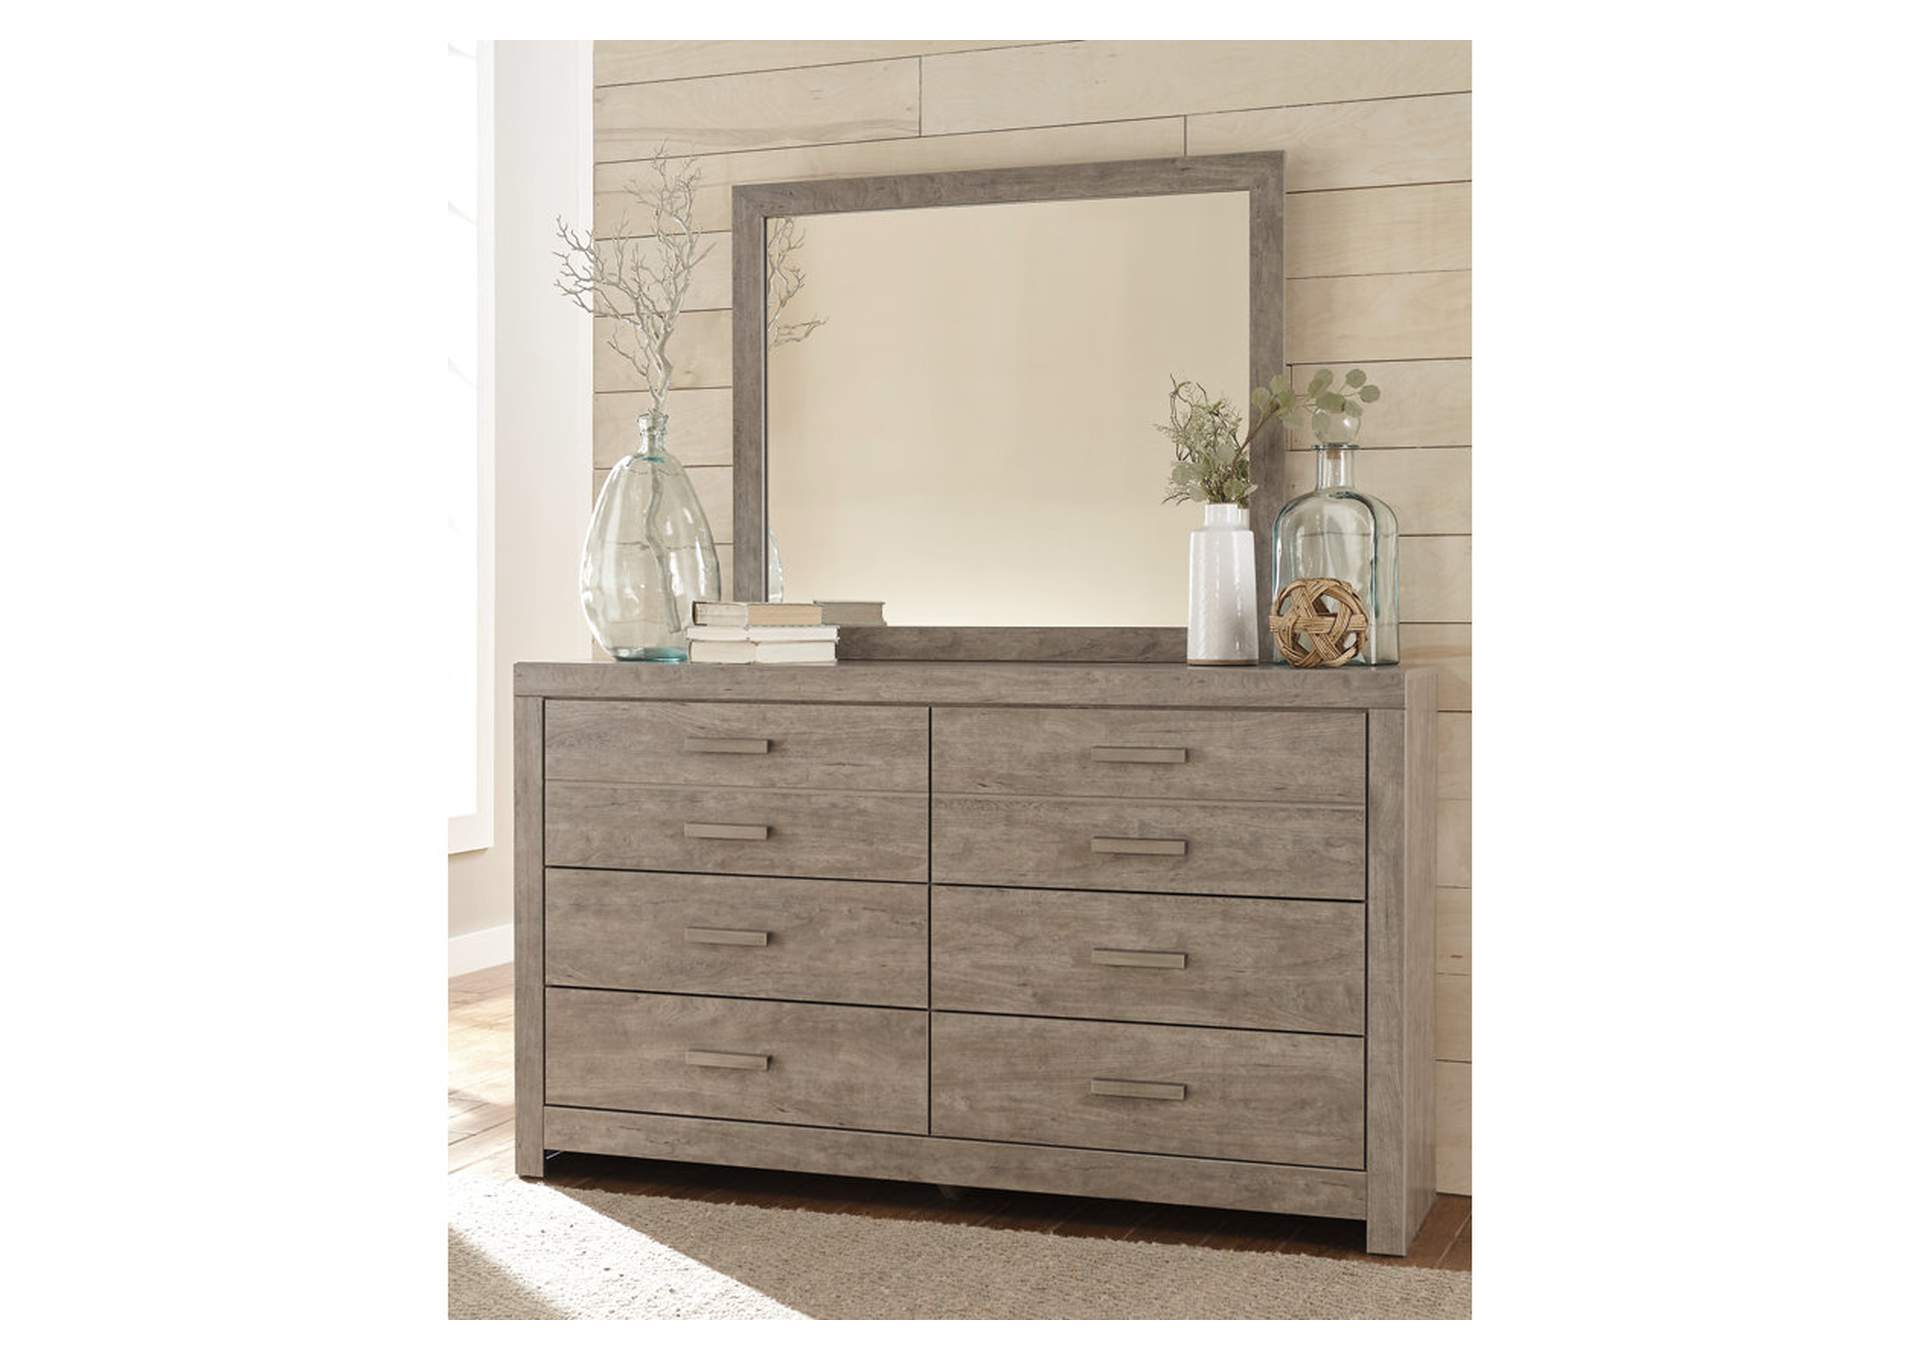 Culverbach King Panel Bed with Mirrored Dresser and 2 Nightstands,Signature Design By Ashley